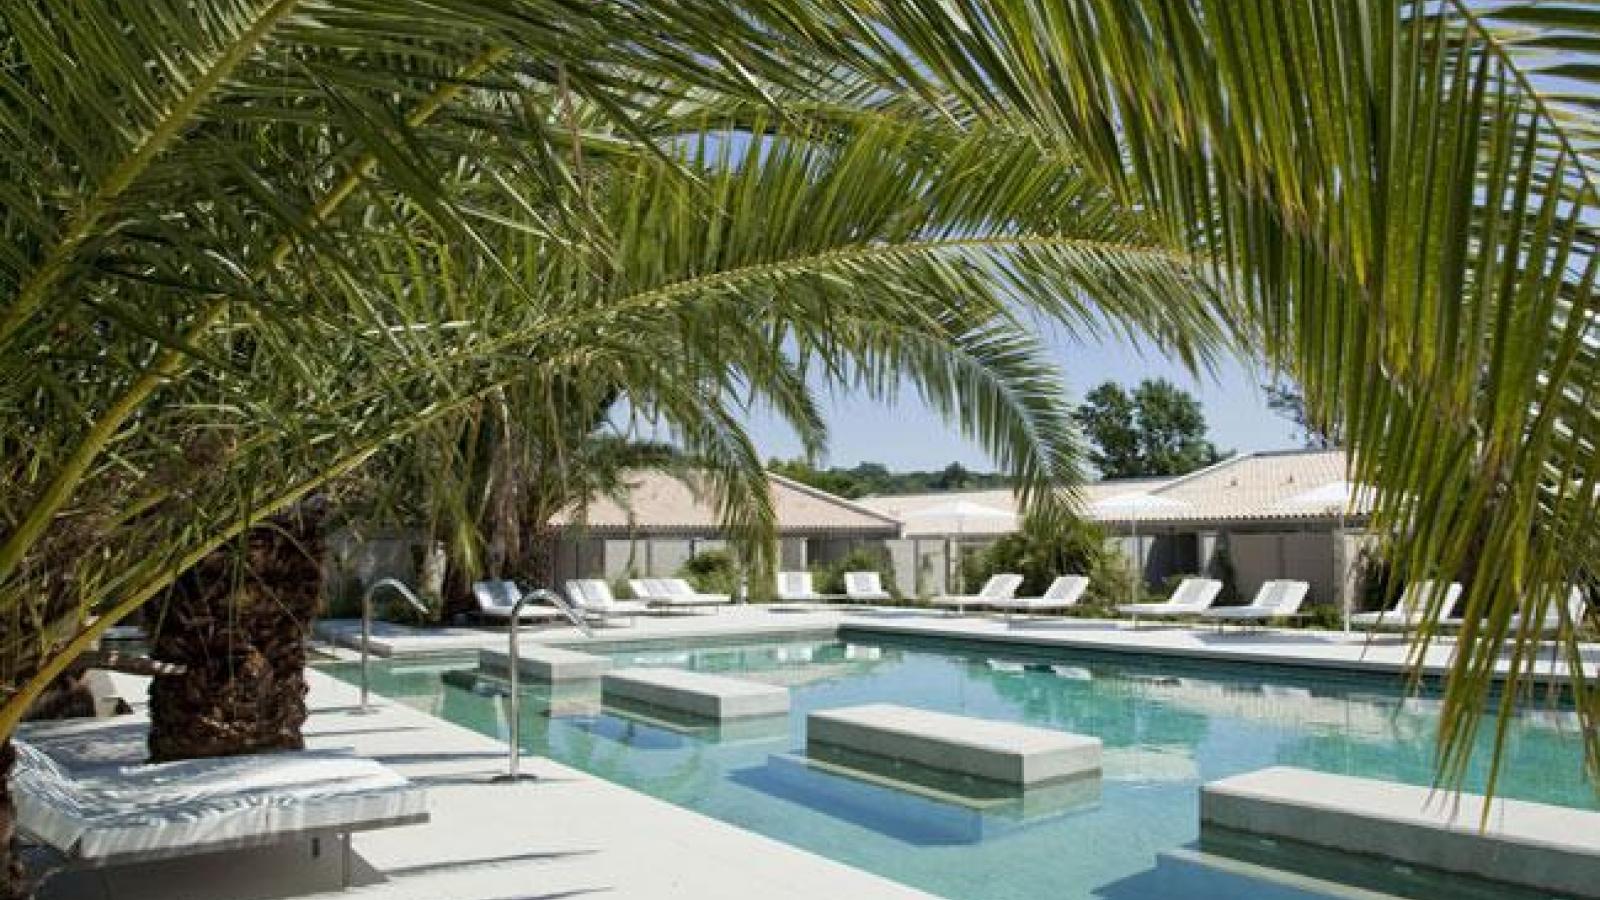 Indian Summer Special offer of the Hotel Sezz Saint-Tropez